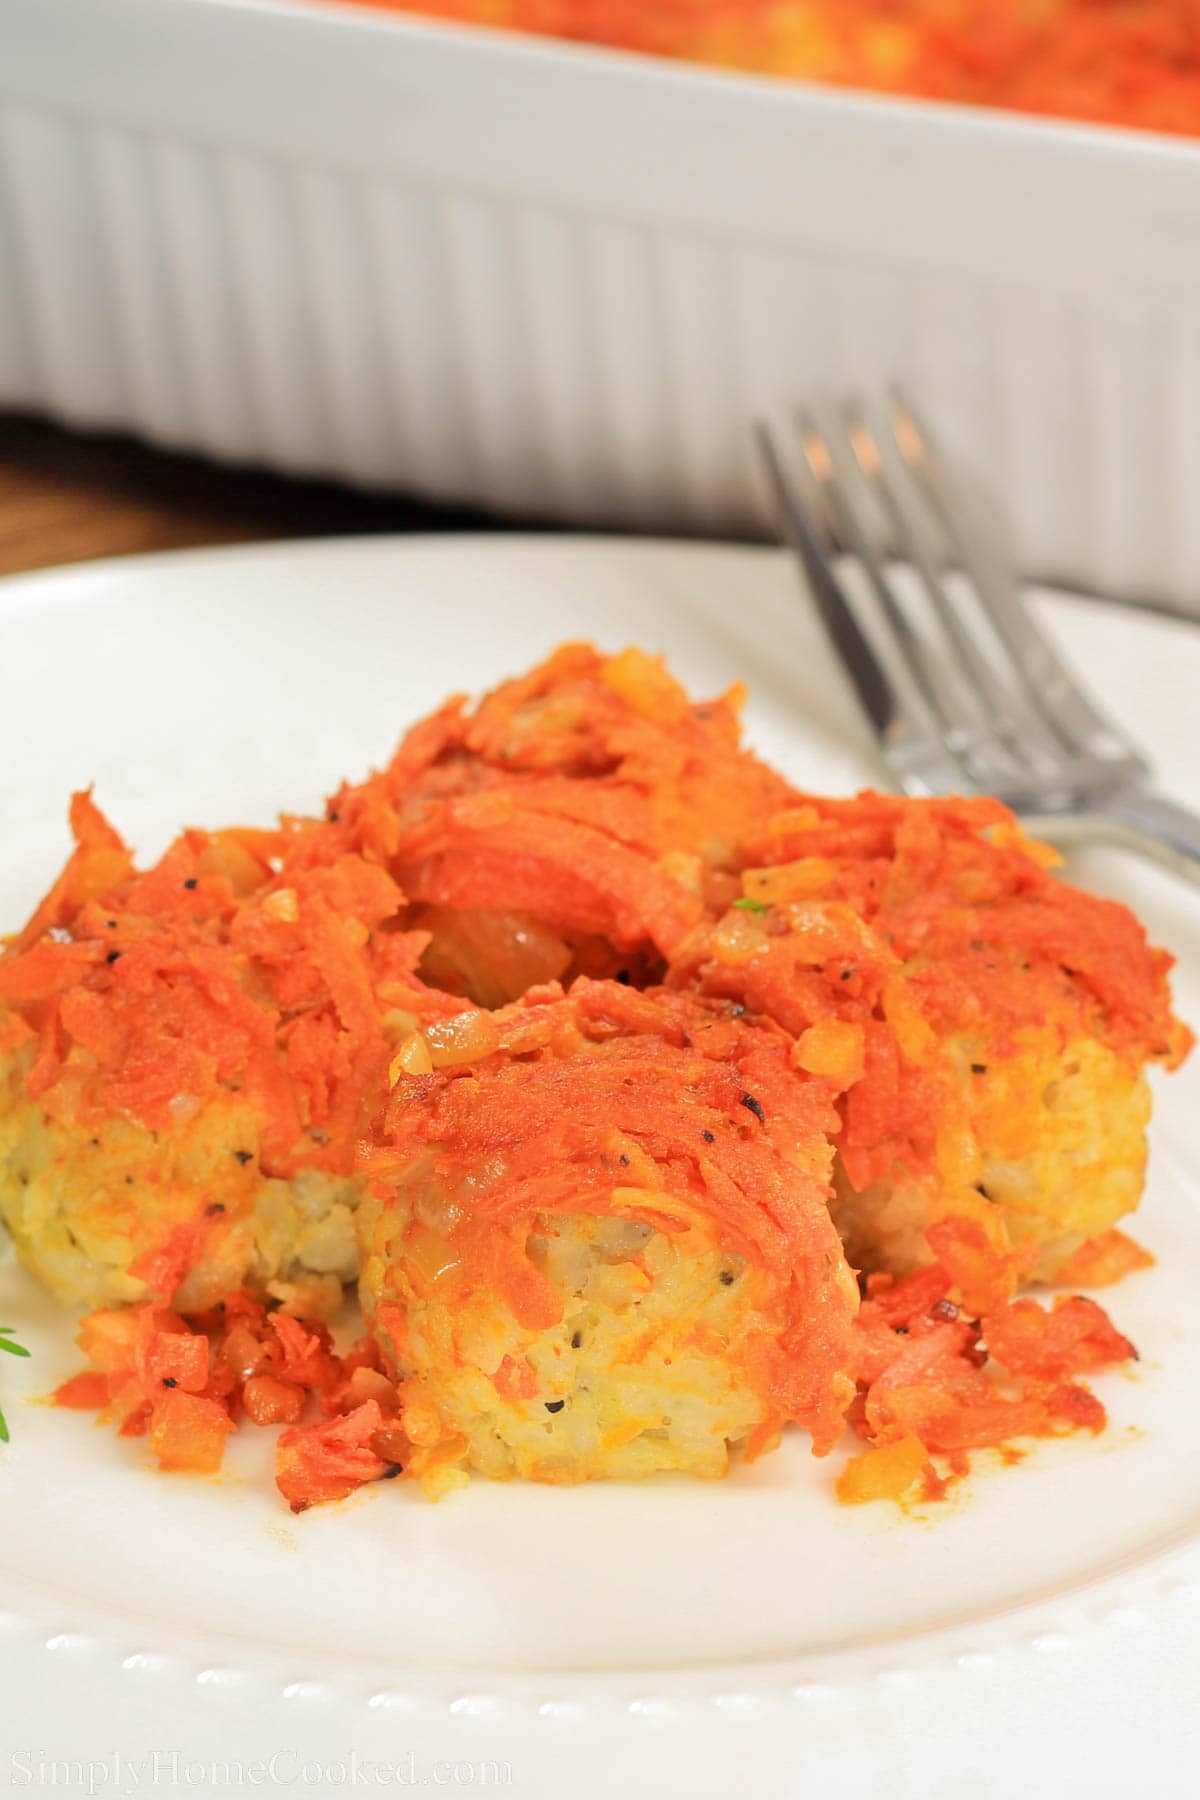 Lazy Cabbage Rolls covered with sauteed onions and carrots on a plate with a fork.